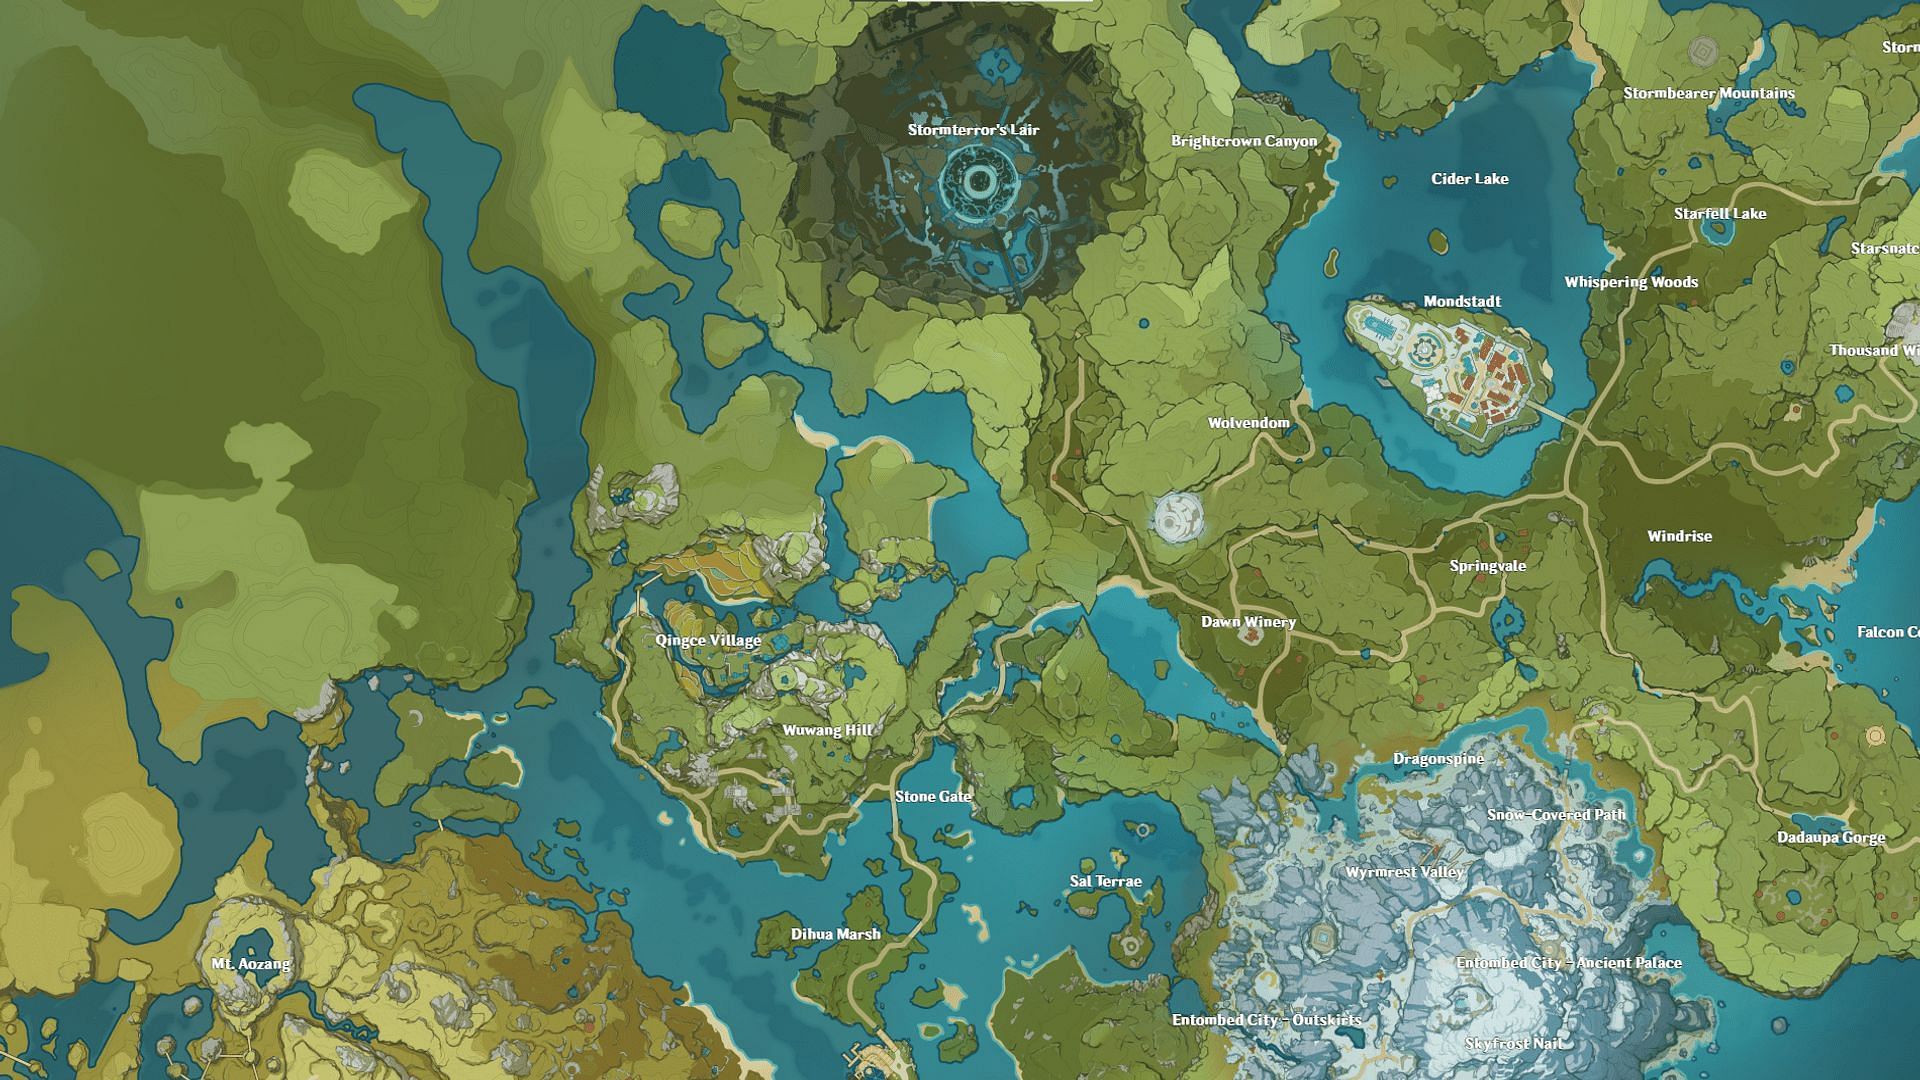 The map will expand significantly according to leaks (Image via Genshin Impact)